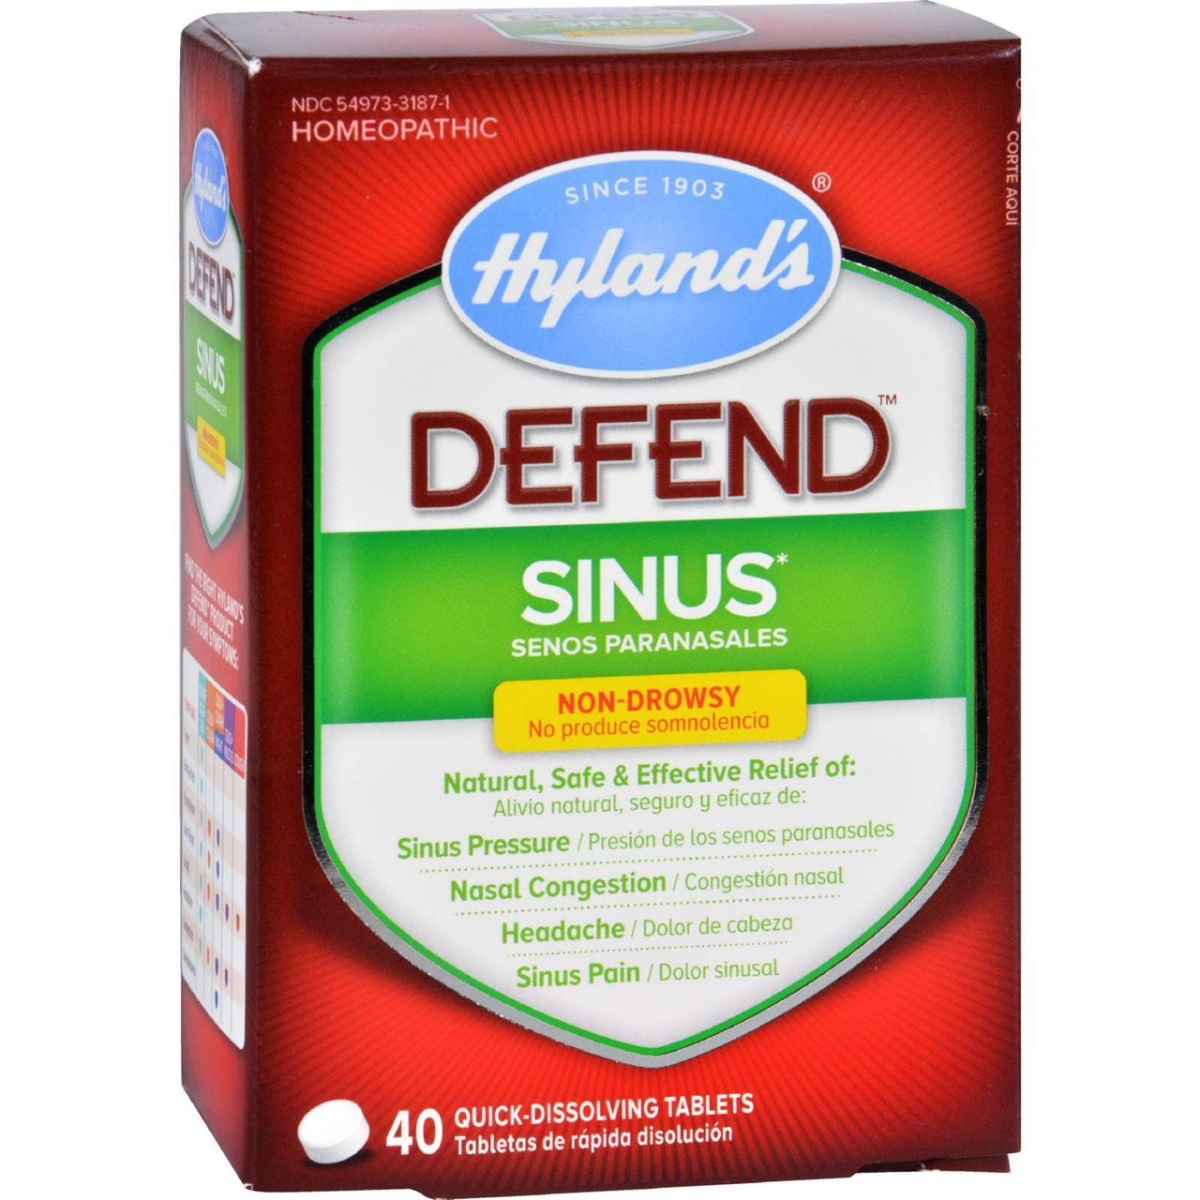 Hg1720242 Homeopathic Sinus, Defend - 40 Tablets